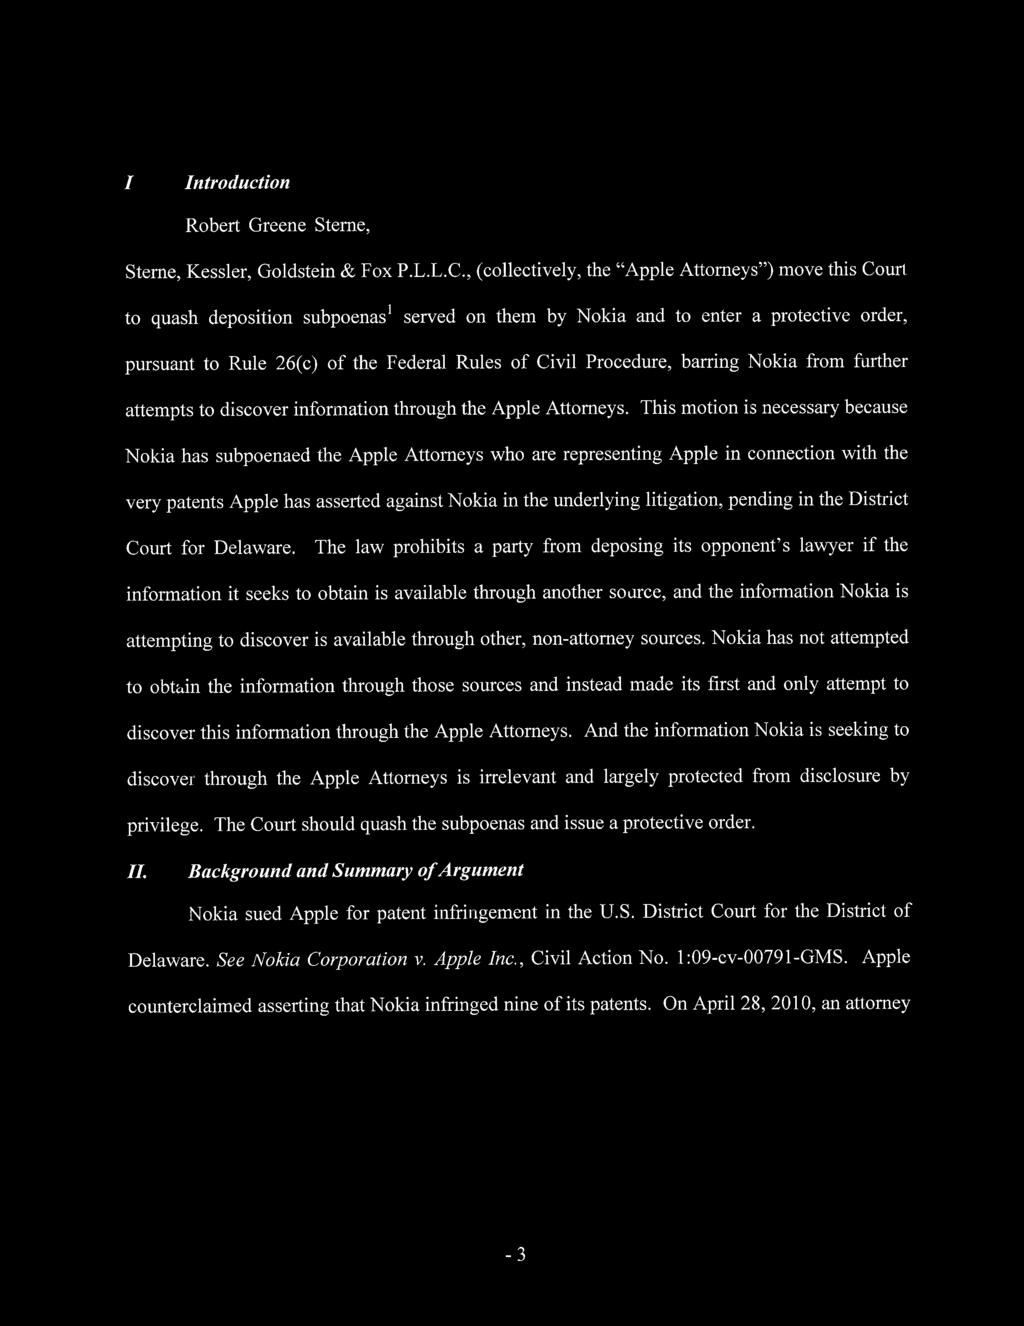 Case 1:11-mc-00295-RLW Document 1 Filed 05/17/11 Page 3 of 14 I. Introduction Robert Greene Sterne, Glenn Perry, Rich Coller, and Salvador Bezos, of the law firm Sterne, Kessler, Goldstein & Fox